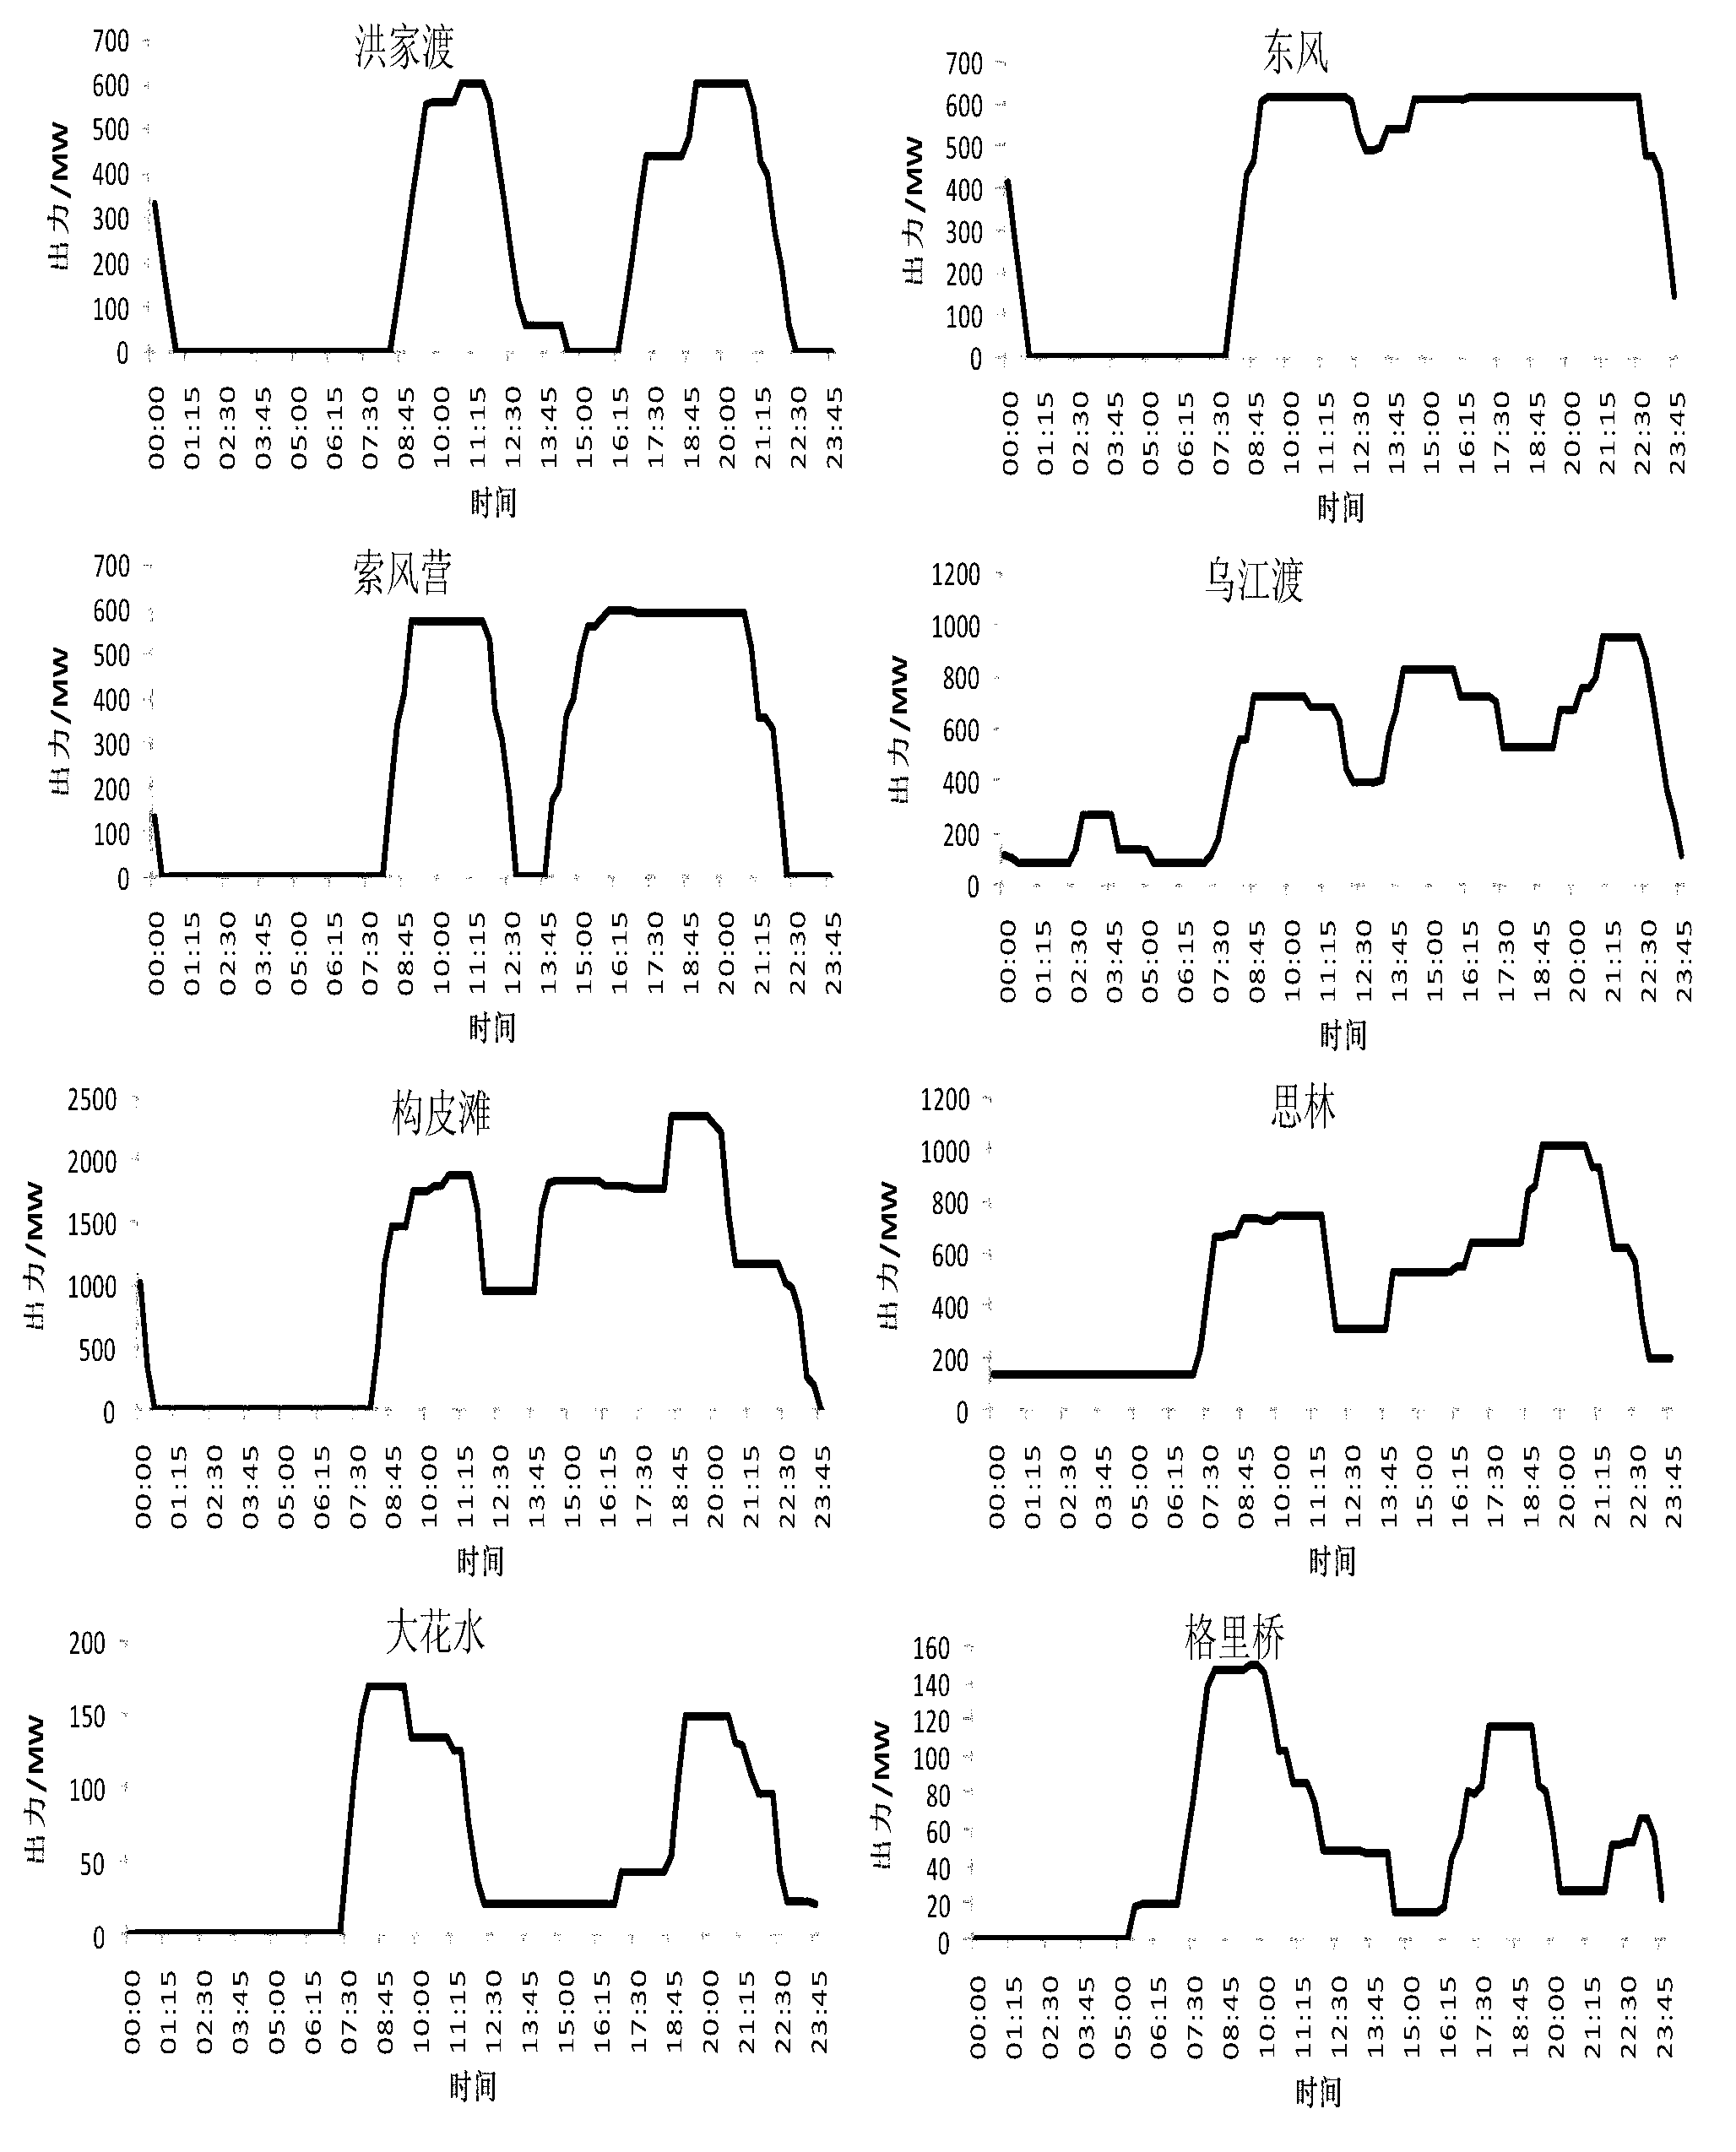 Method for mixedly optimizing and dispatching hydropower station group, power stations and units